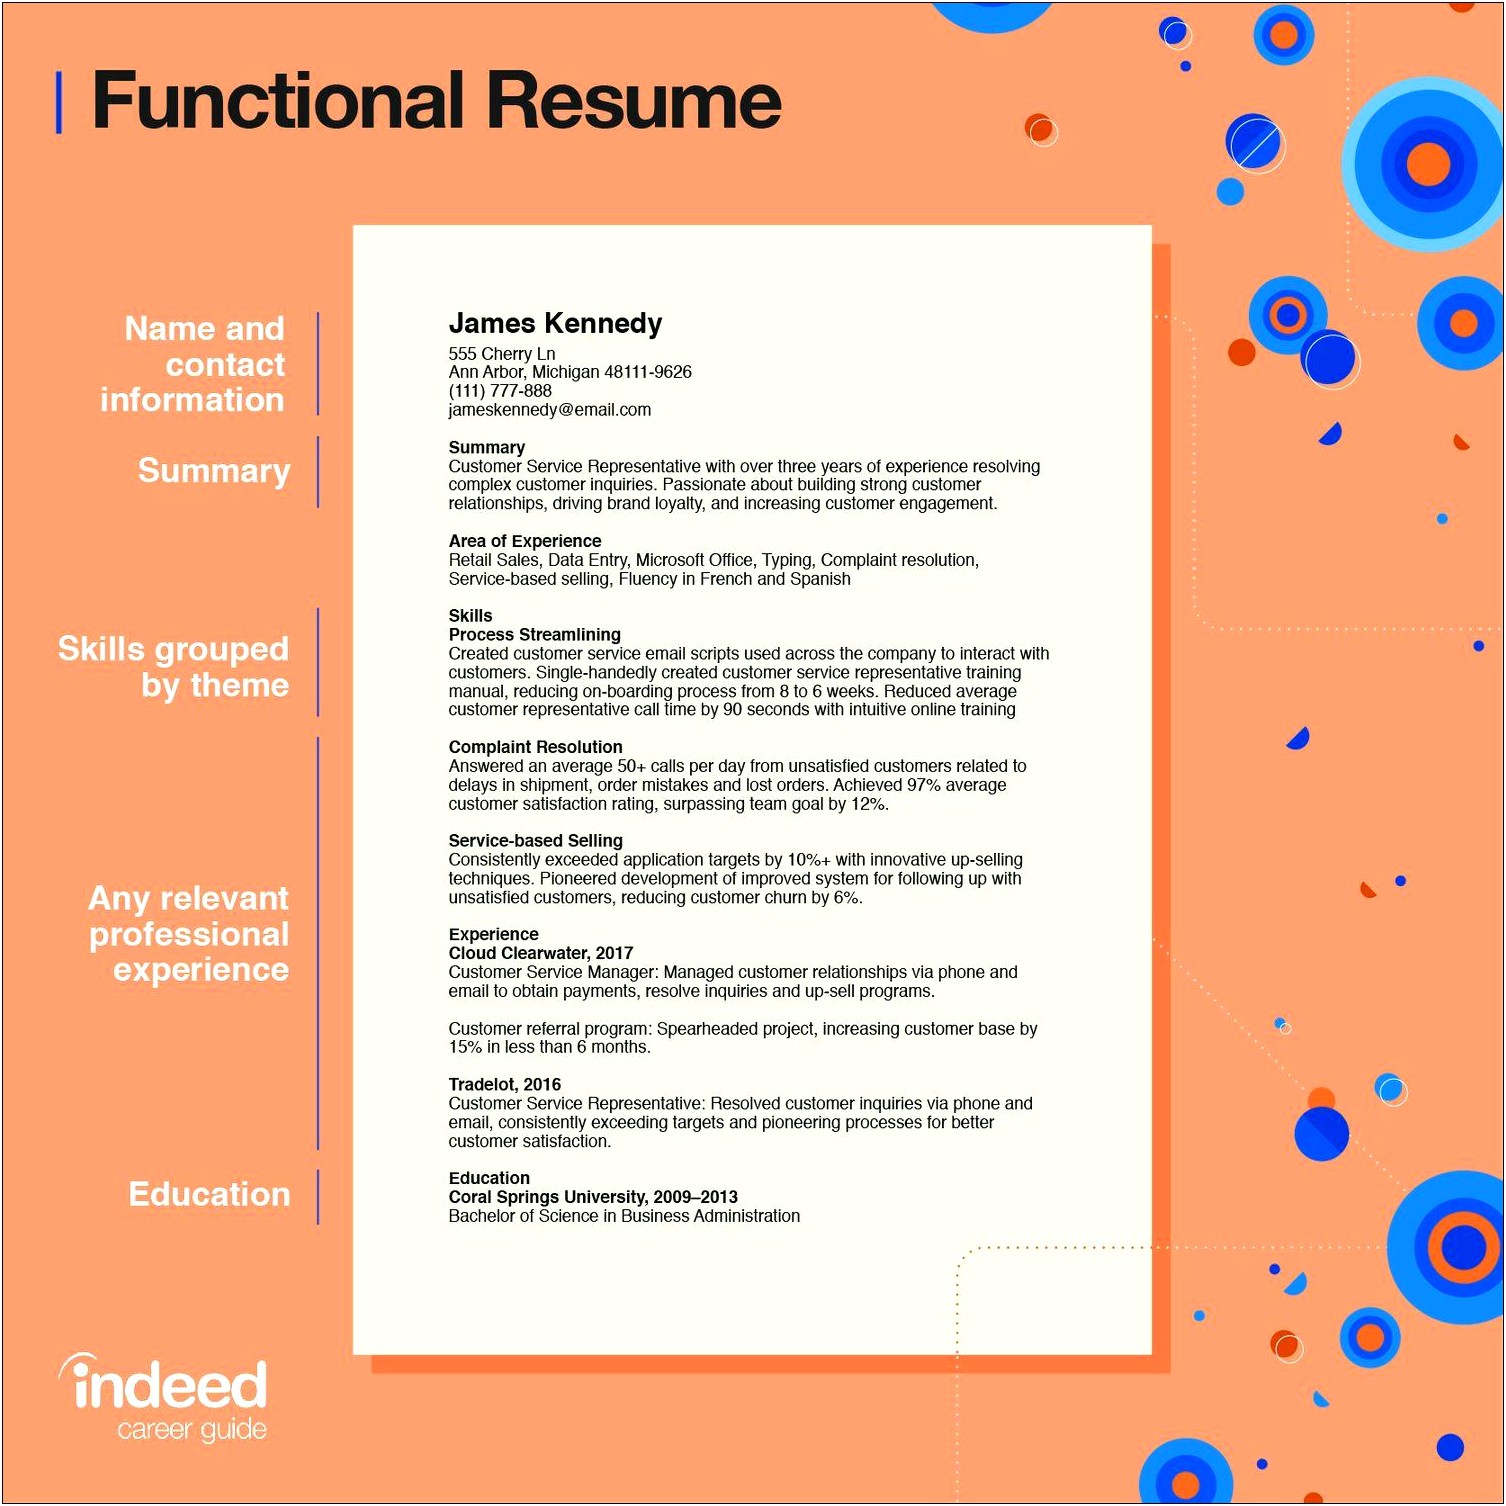 Functional Resume Examples For Customer Service